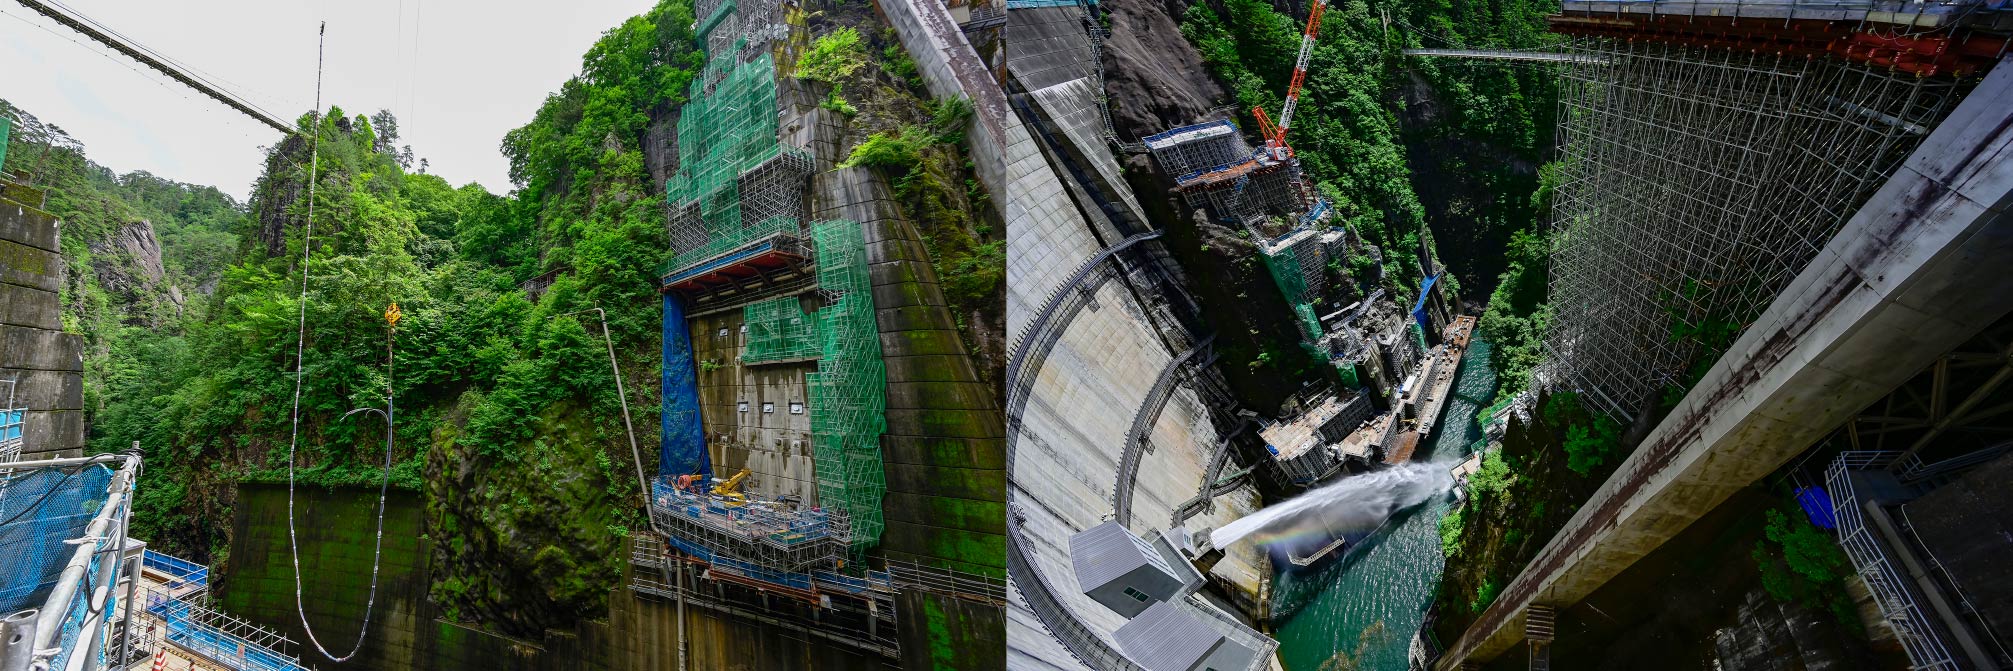 Example of bedrock PS anchor: Go to the Kawamata Dam reinforcement work